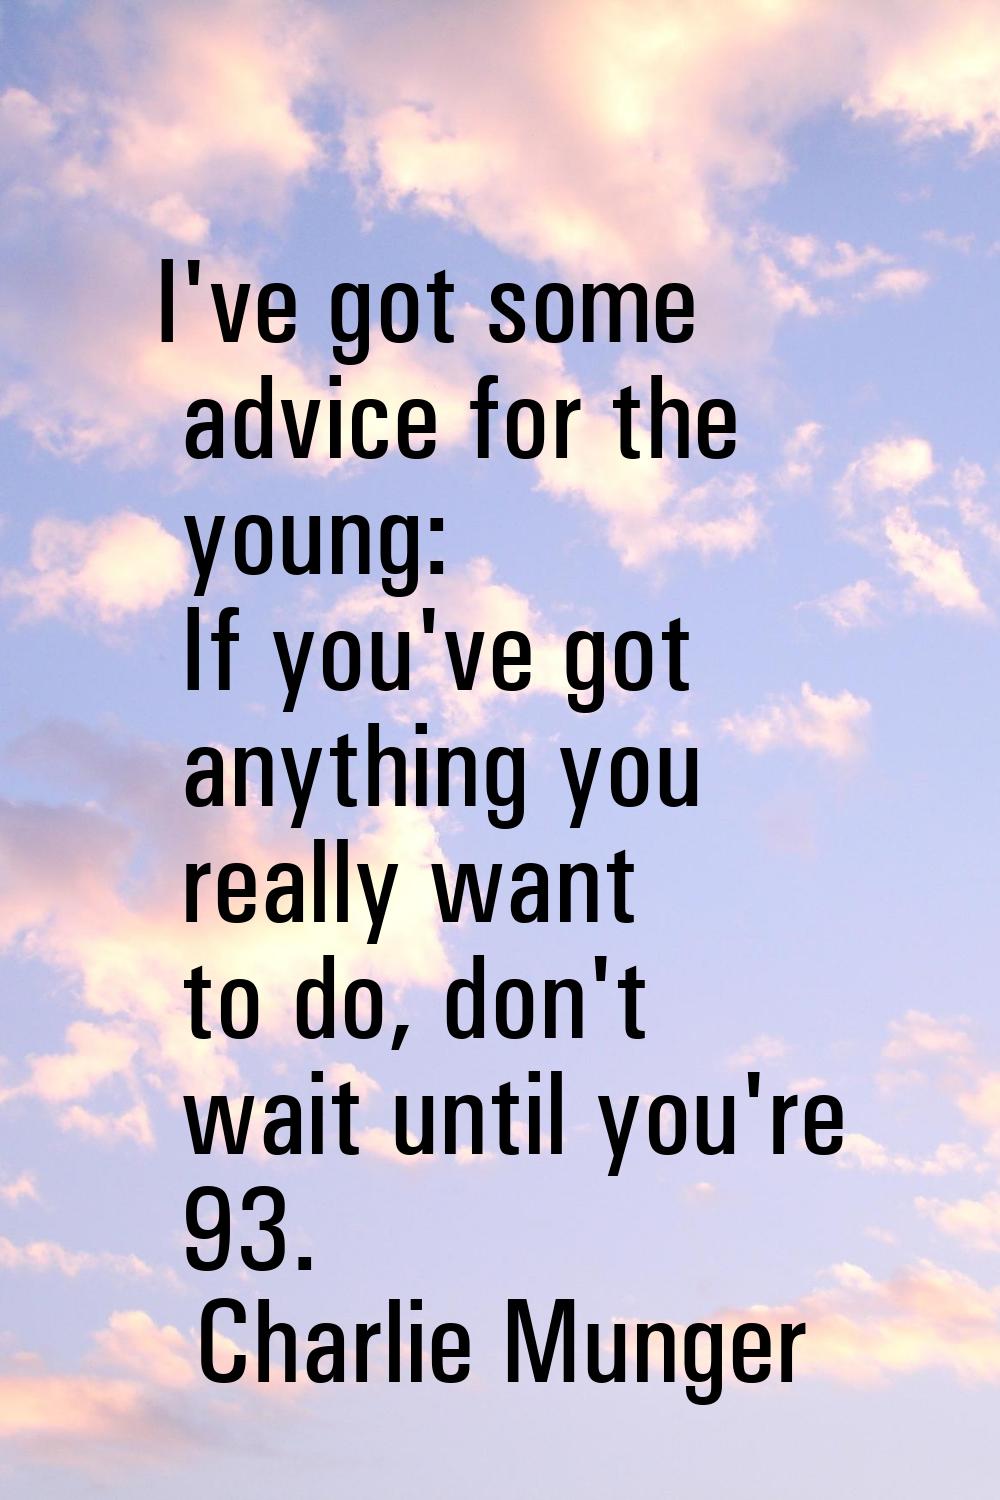 I've got some advice for the young: If you've got anything you really want to do, don't wait until 